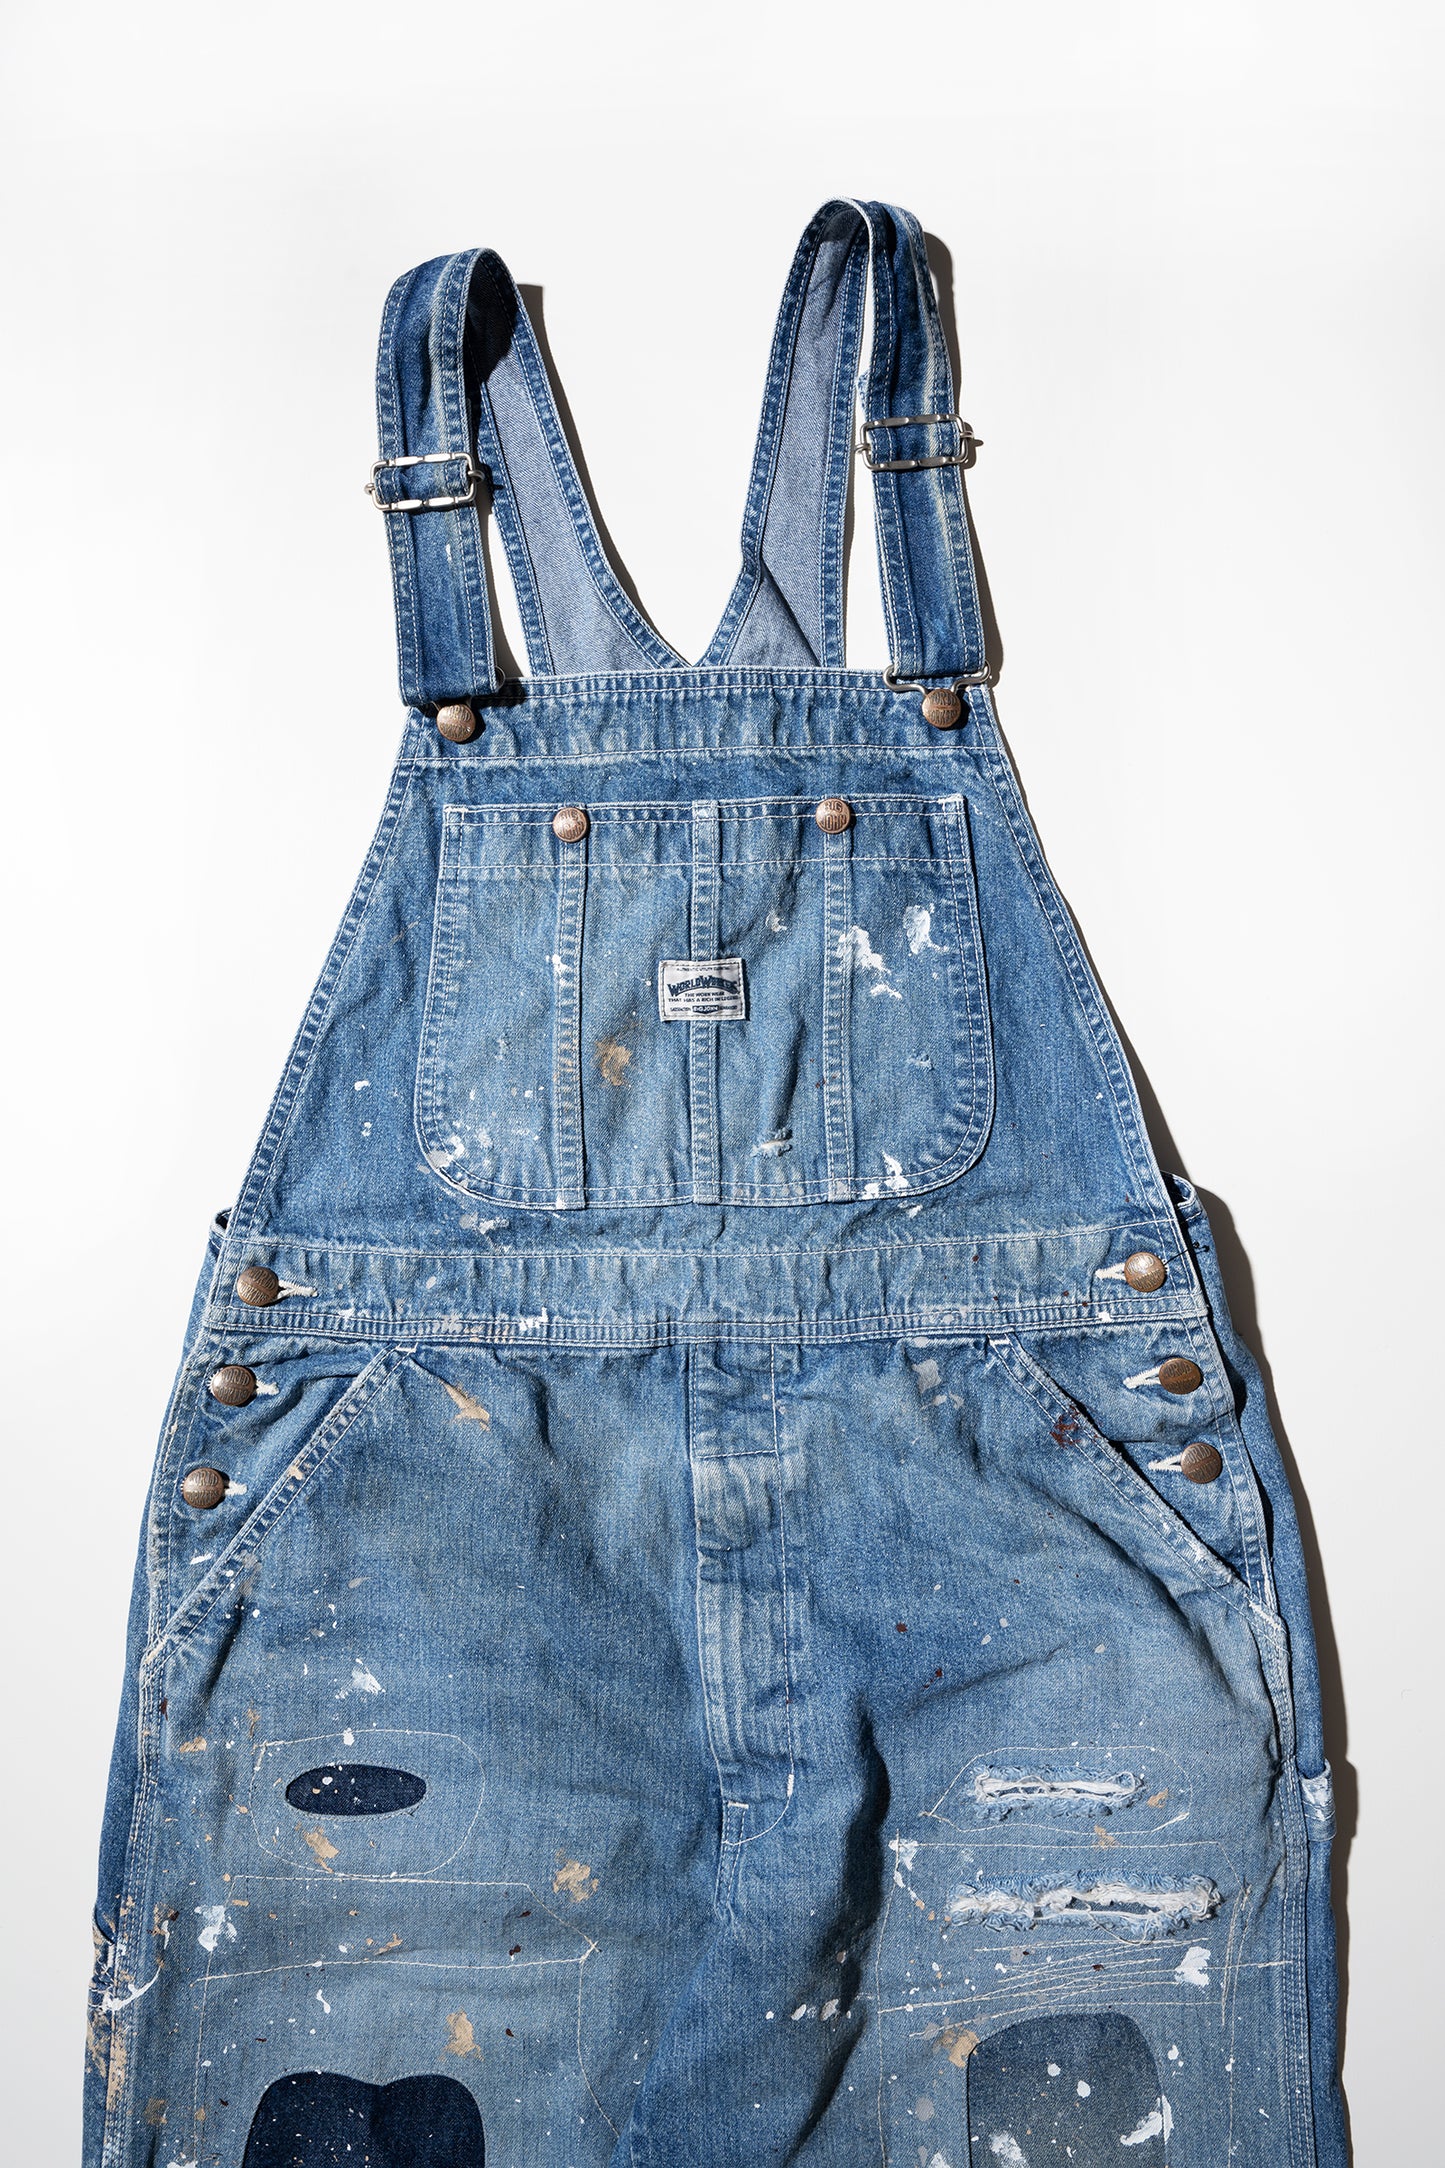 WW502K (445R) World Workers Overall in LABO